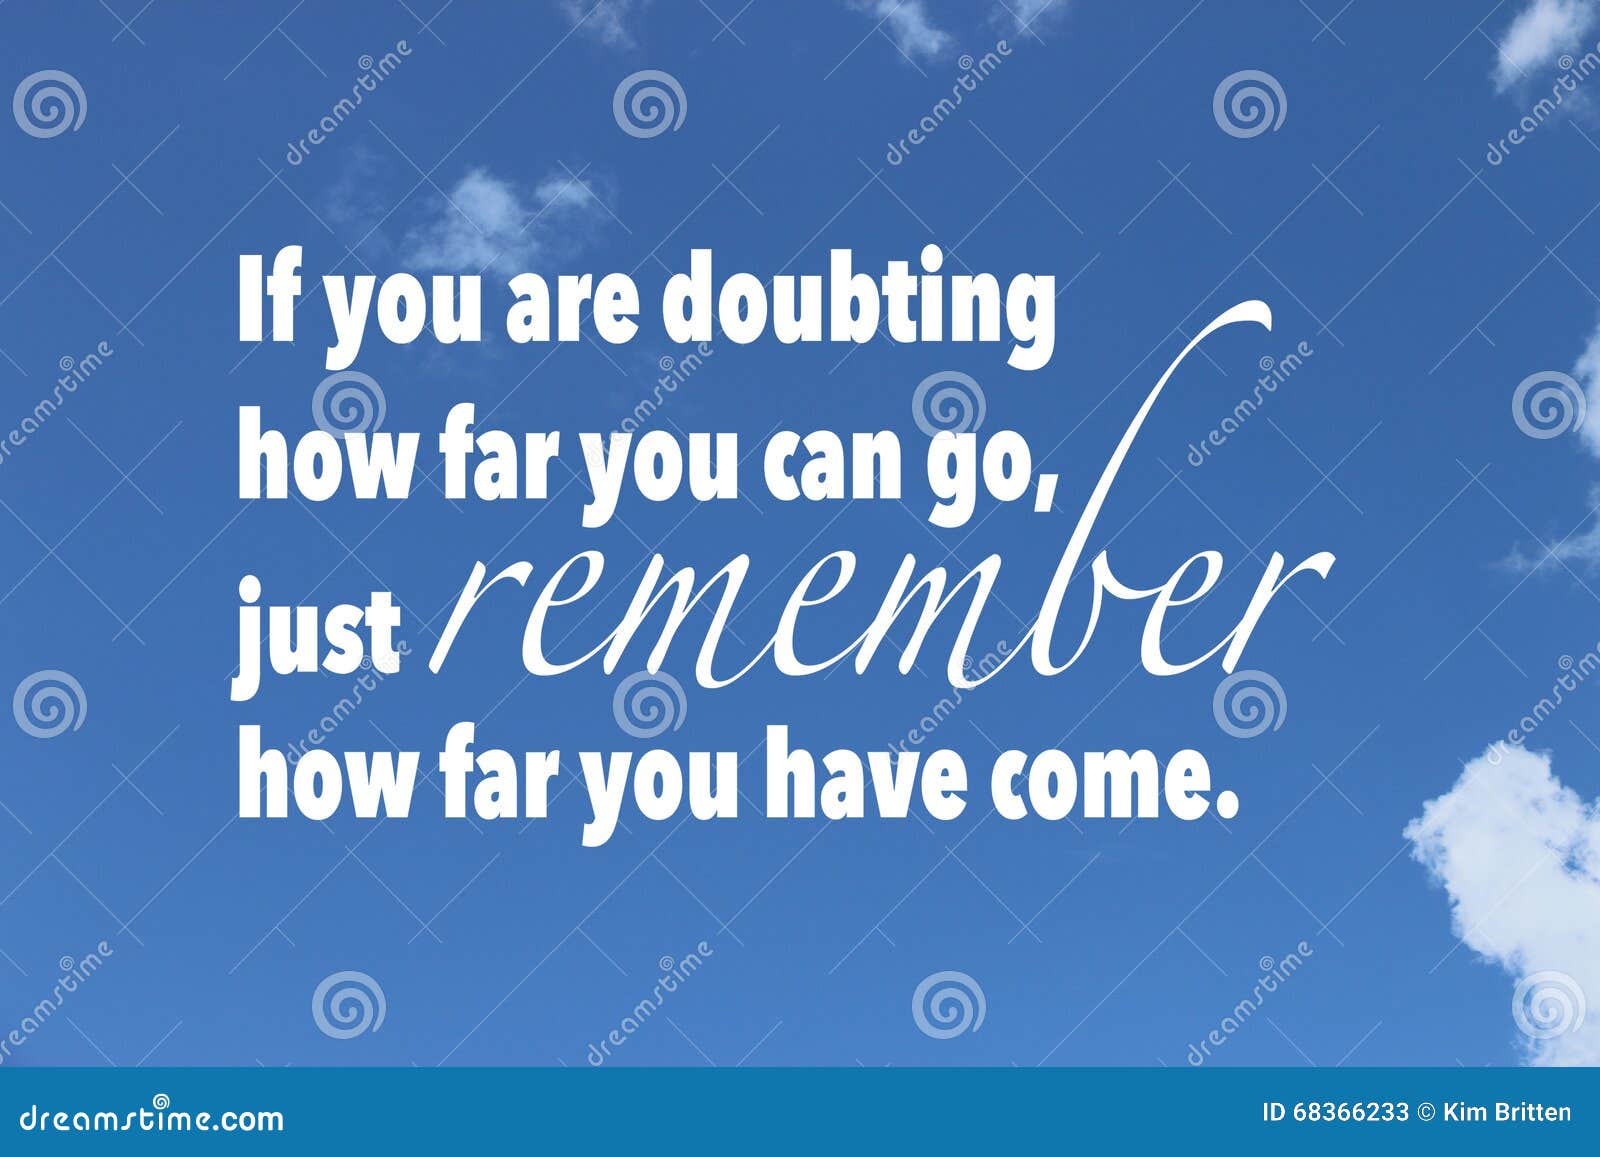 Inspirational Quote On Blue Sky Background Stock Image Image